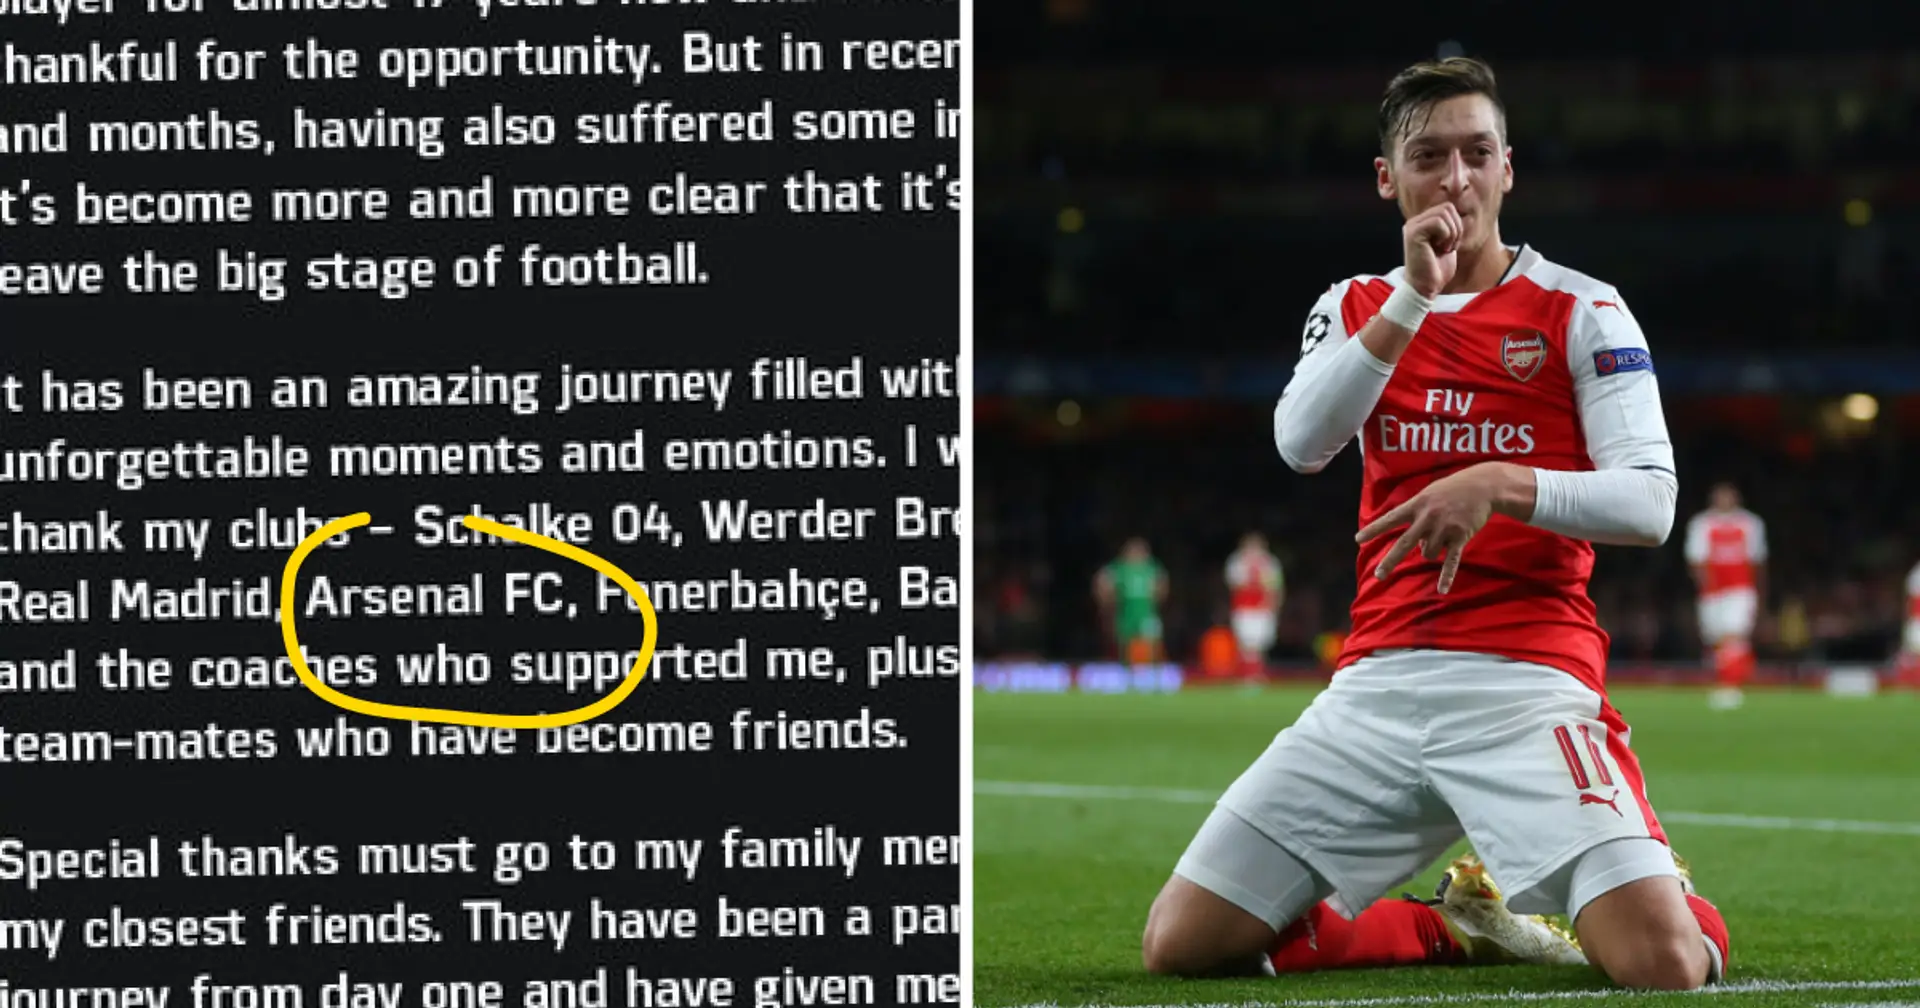 Mesut Ozil officially retires aged 34, mentions Arsenal in farewell message